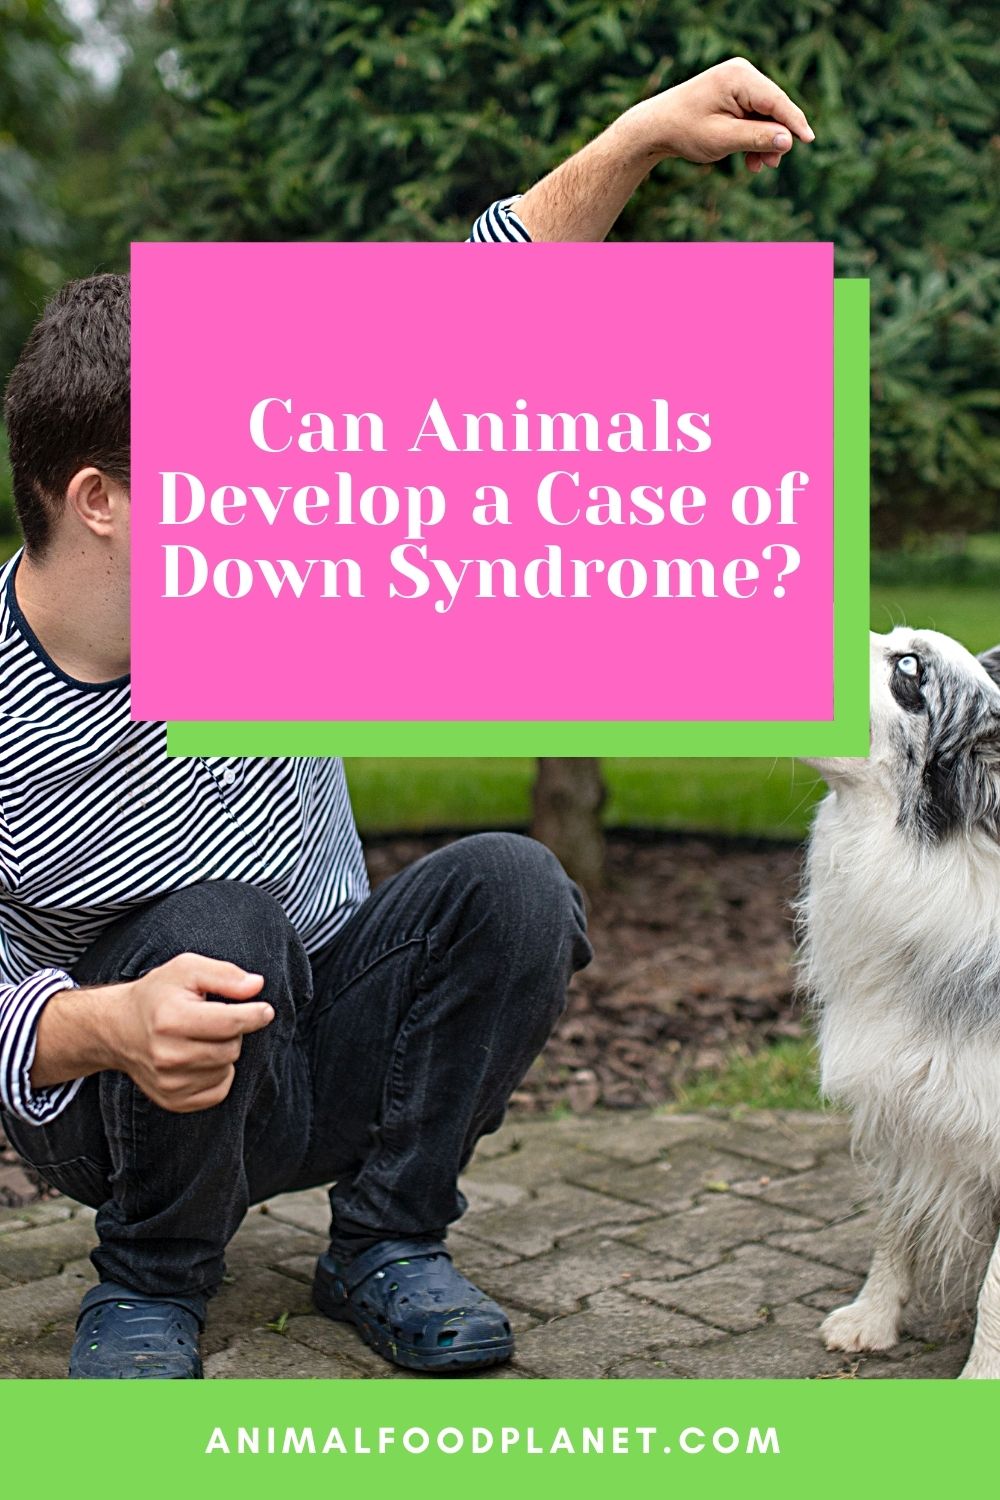 Can Animals Develop a Case of Down Syndrome?